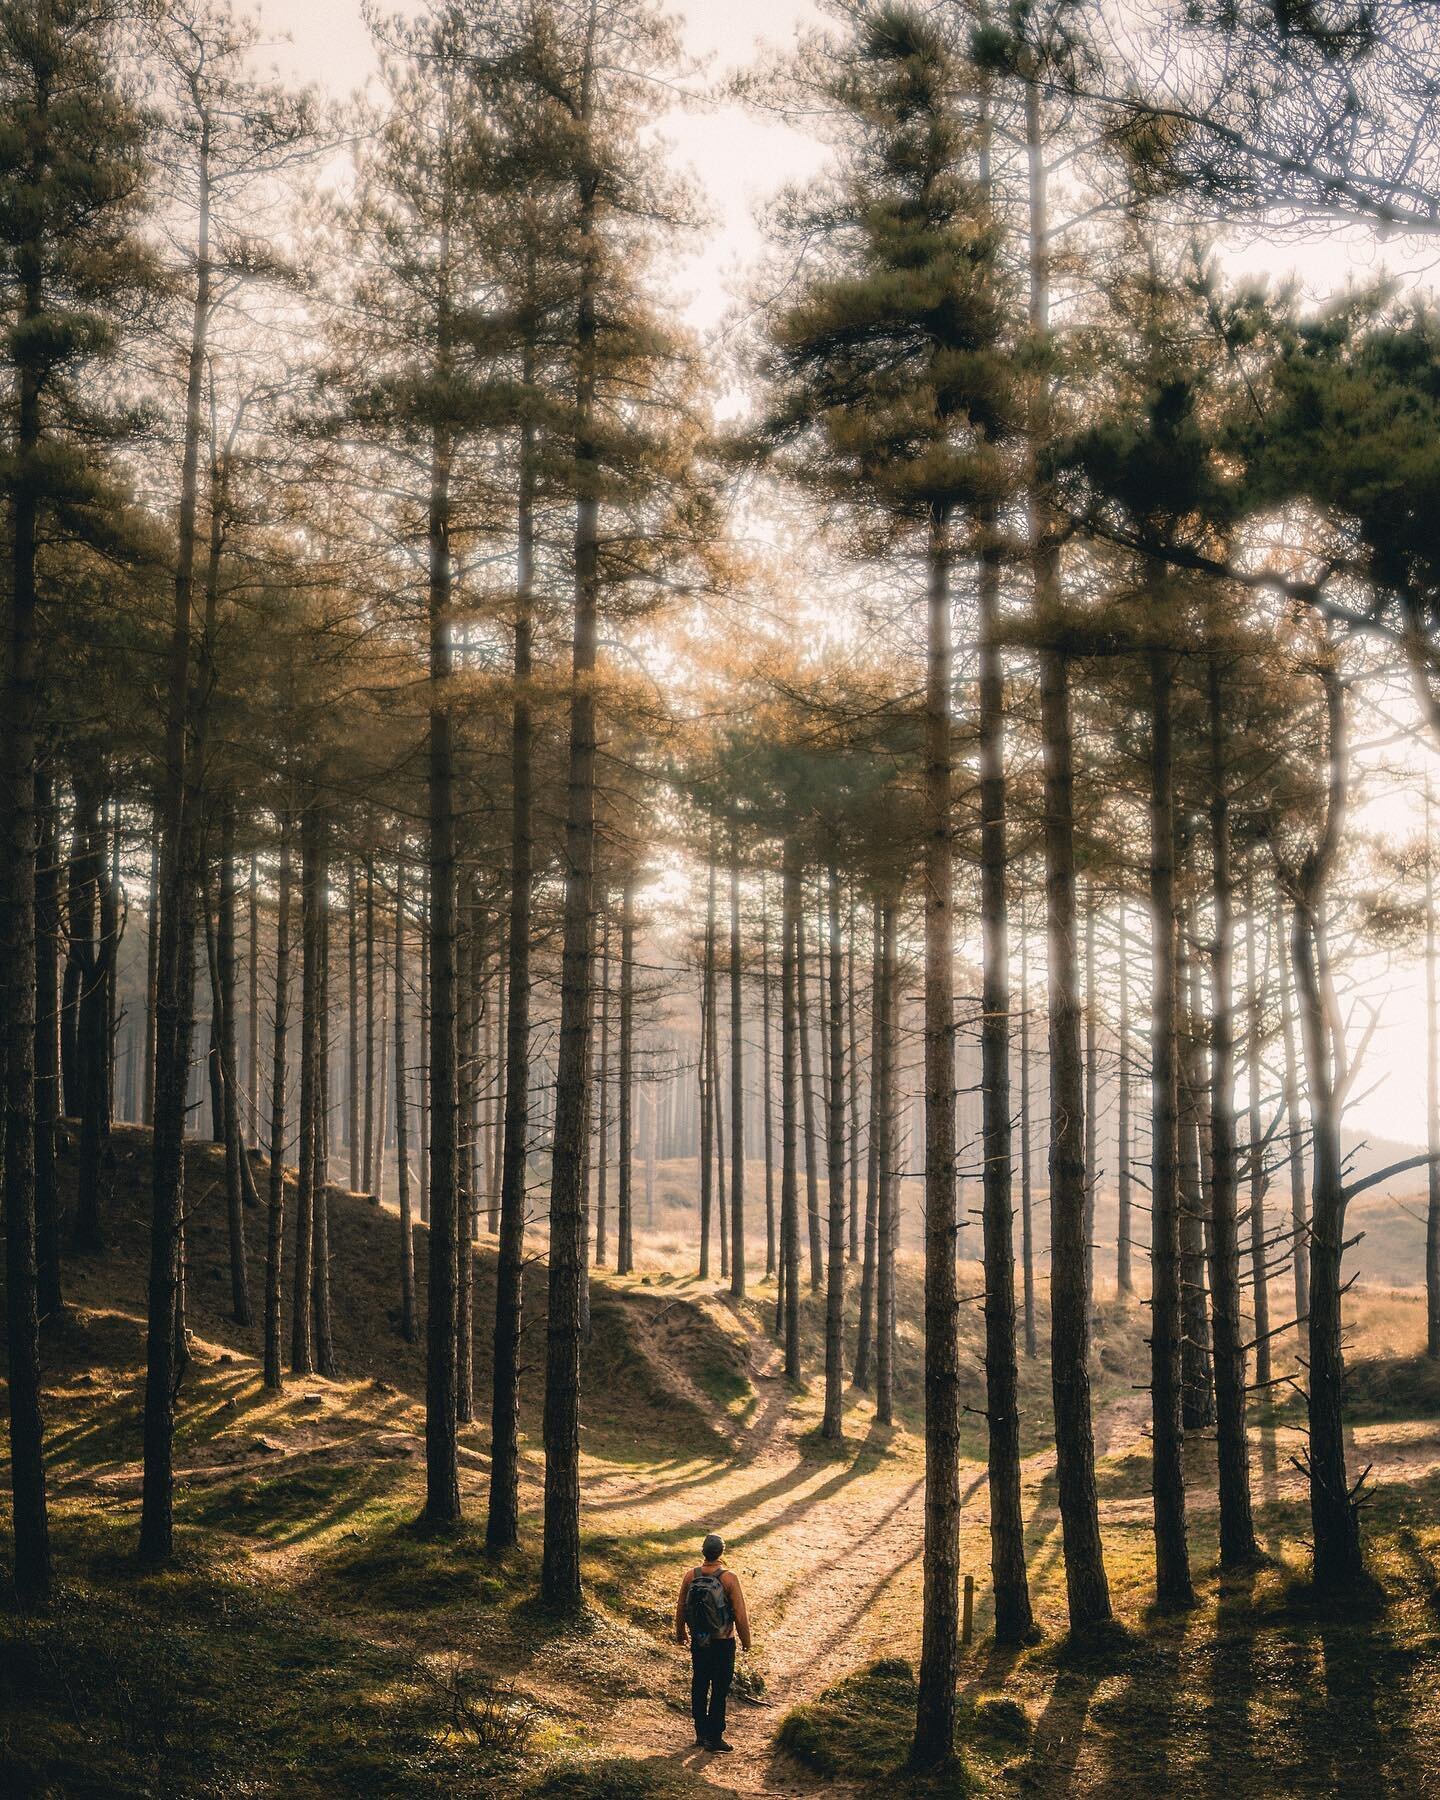 Exploring in Newborough forest, shot by @craigdavidmack. 
I saw 2 red squirrels here, the first I&rsquo;ve seen since I was a kid! 

I definitely fancy heading here again soon and spending a whole weekend photographing the squirrels.